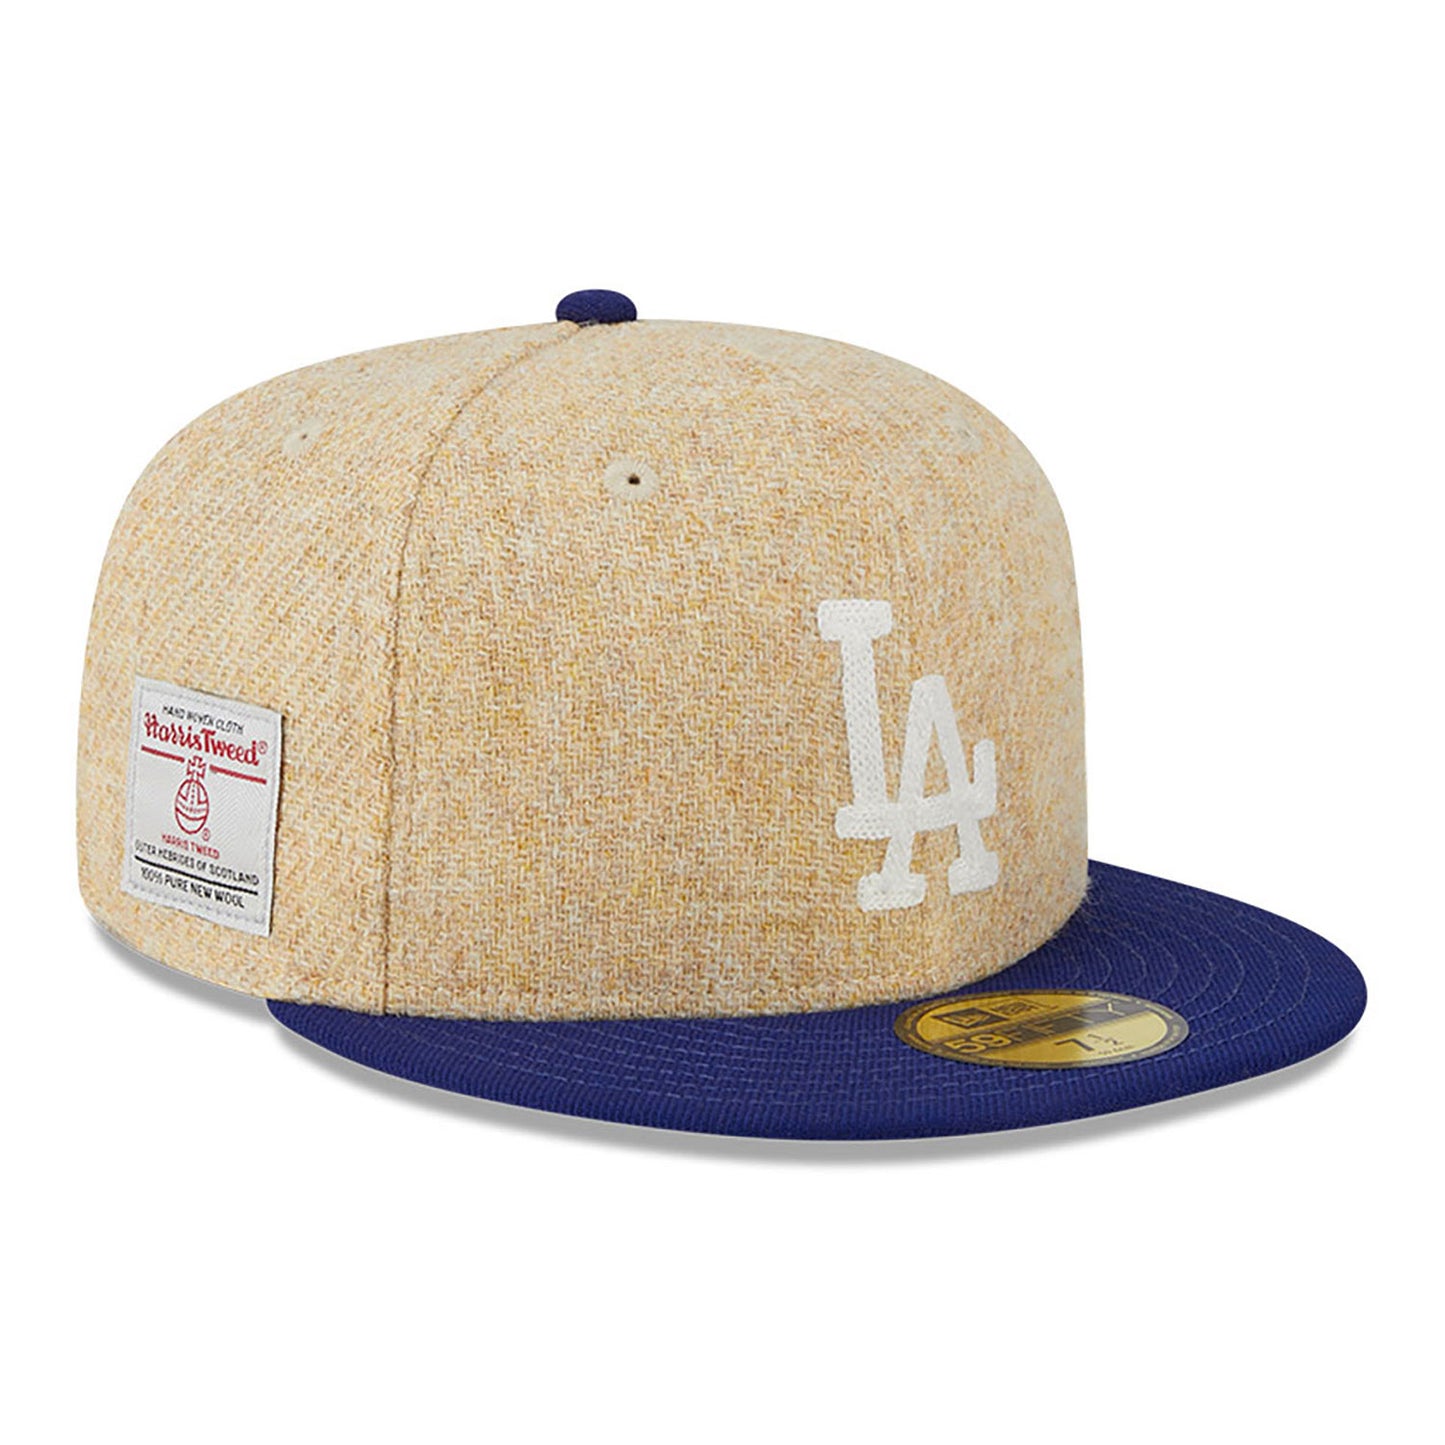 NEW ERA 59FIFTY MLB LOS ANGELES DODGERS HARRIS TWEED TWO TONE / GREY UV FITTED CAP